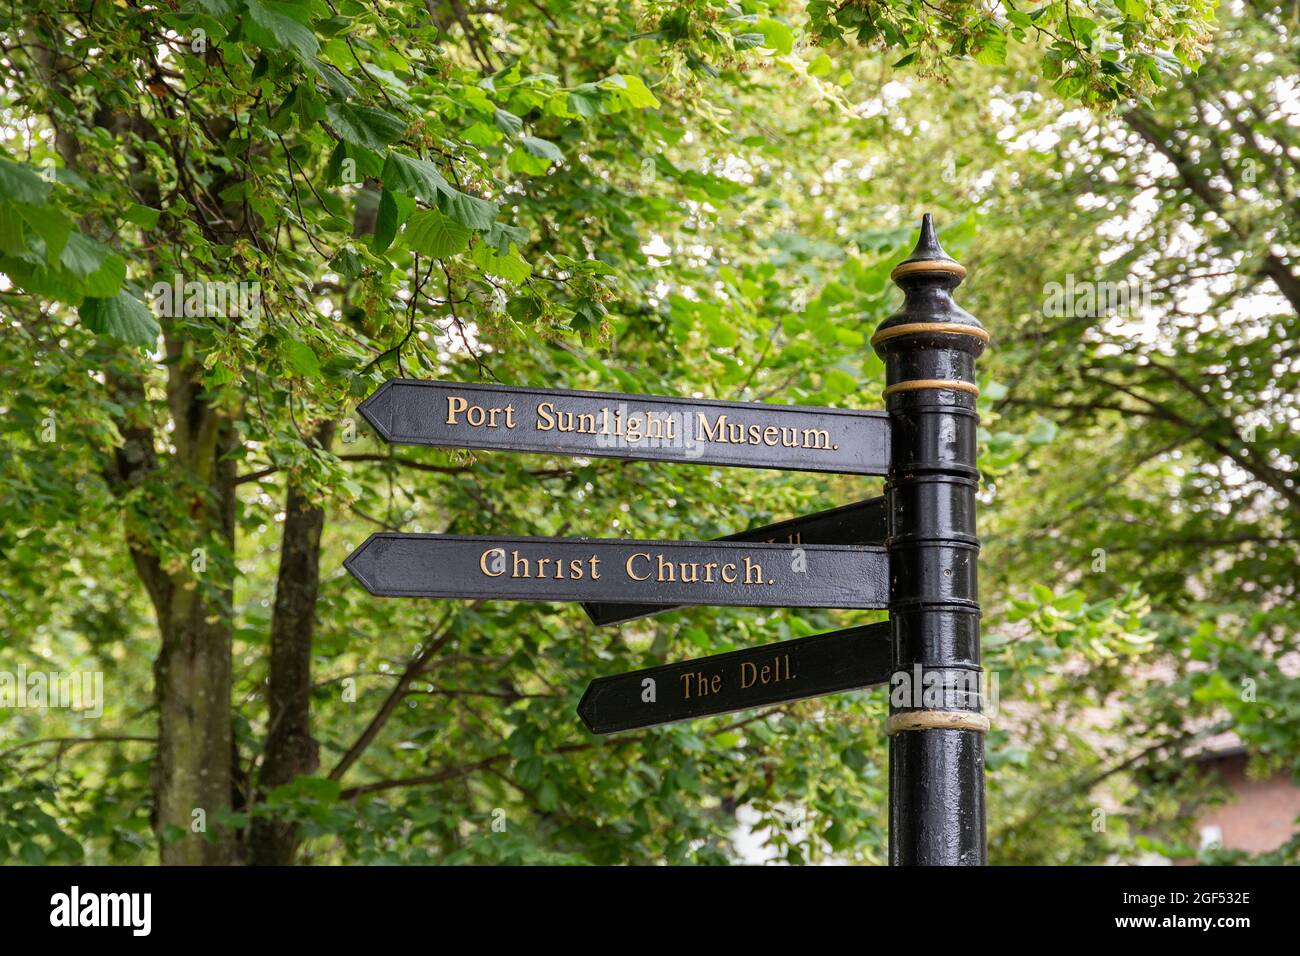 Port Sunlight, Wirral, UK: Finger post signpost providing directions to village locations - the museum, Christ Church, and The Dell. Stock Photo